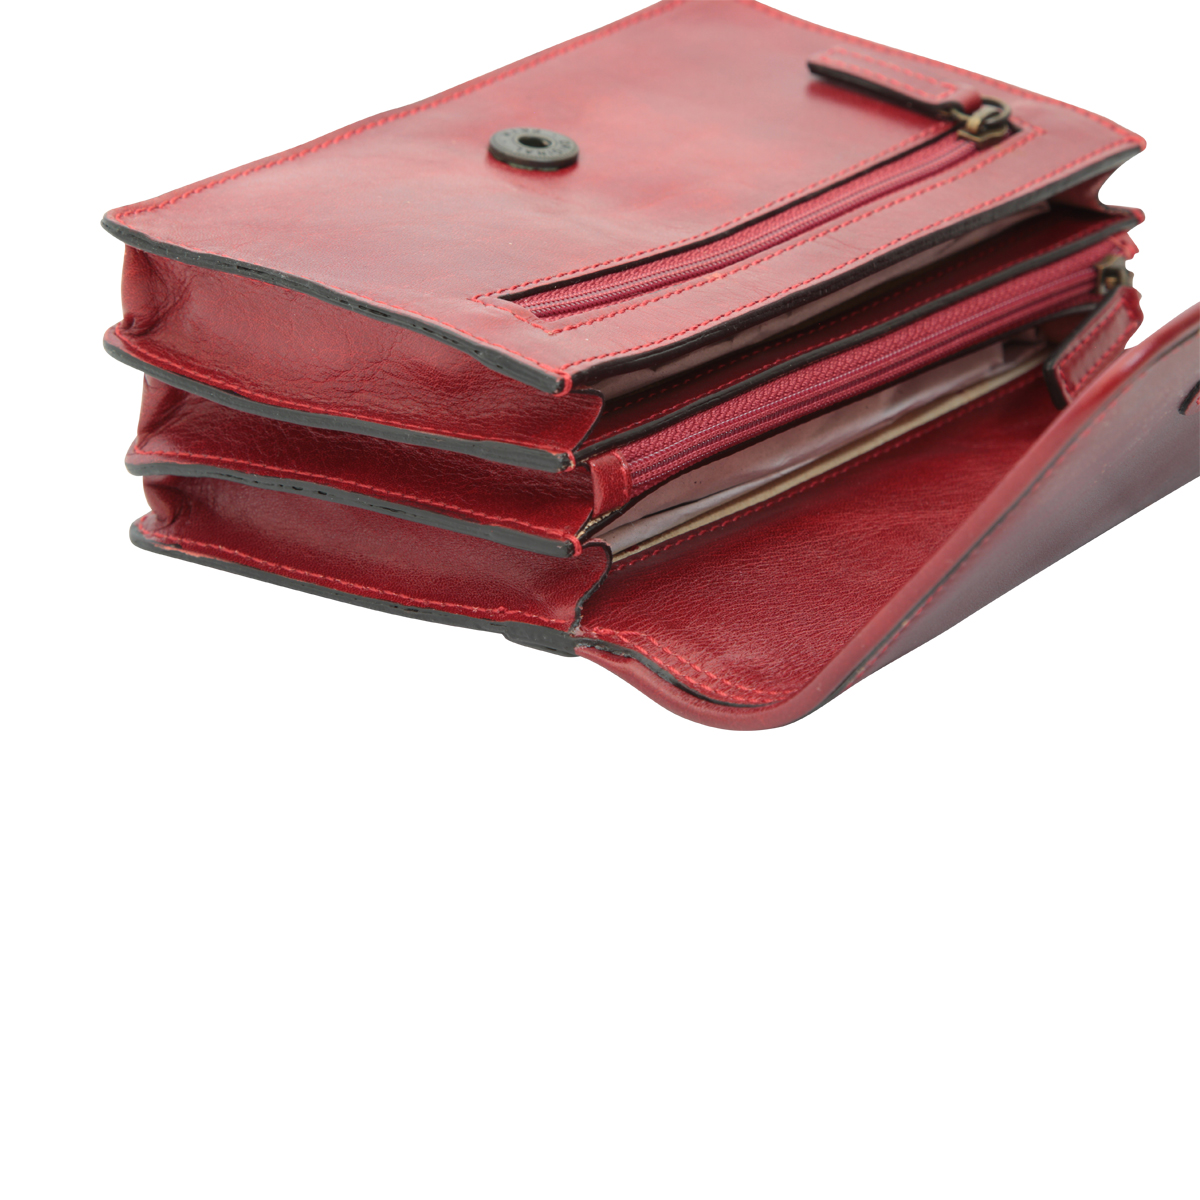 Leather pochette - red|407989RO|Old Angler Firenze